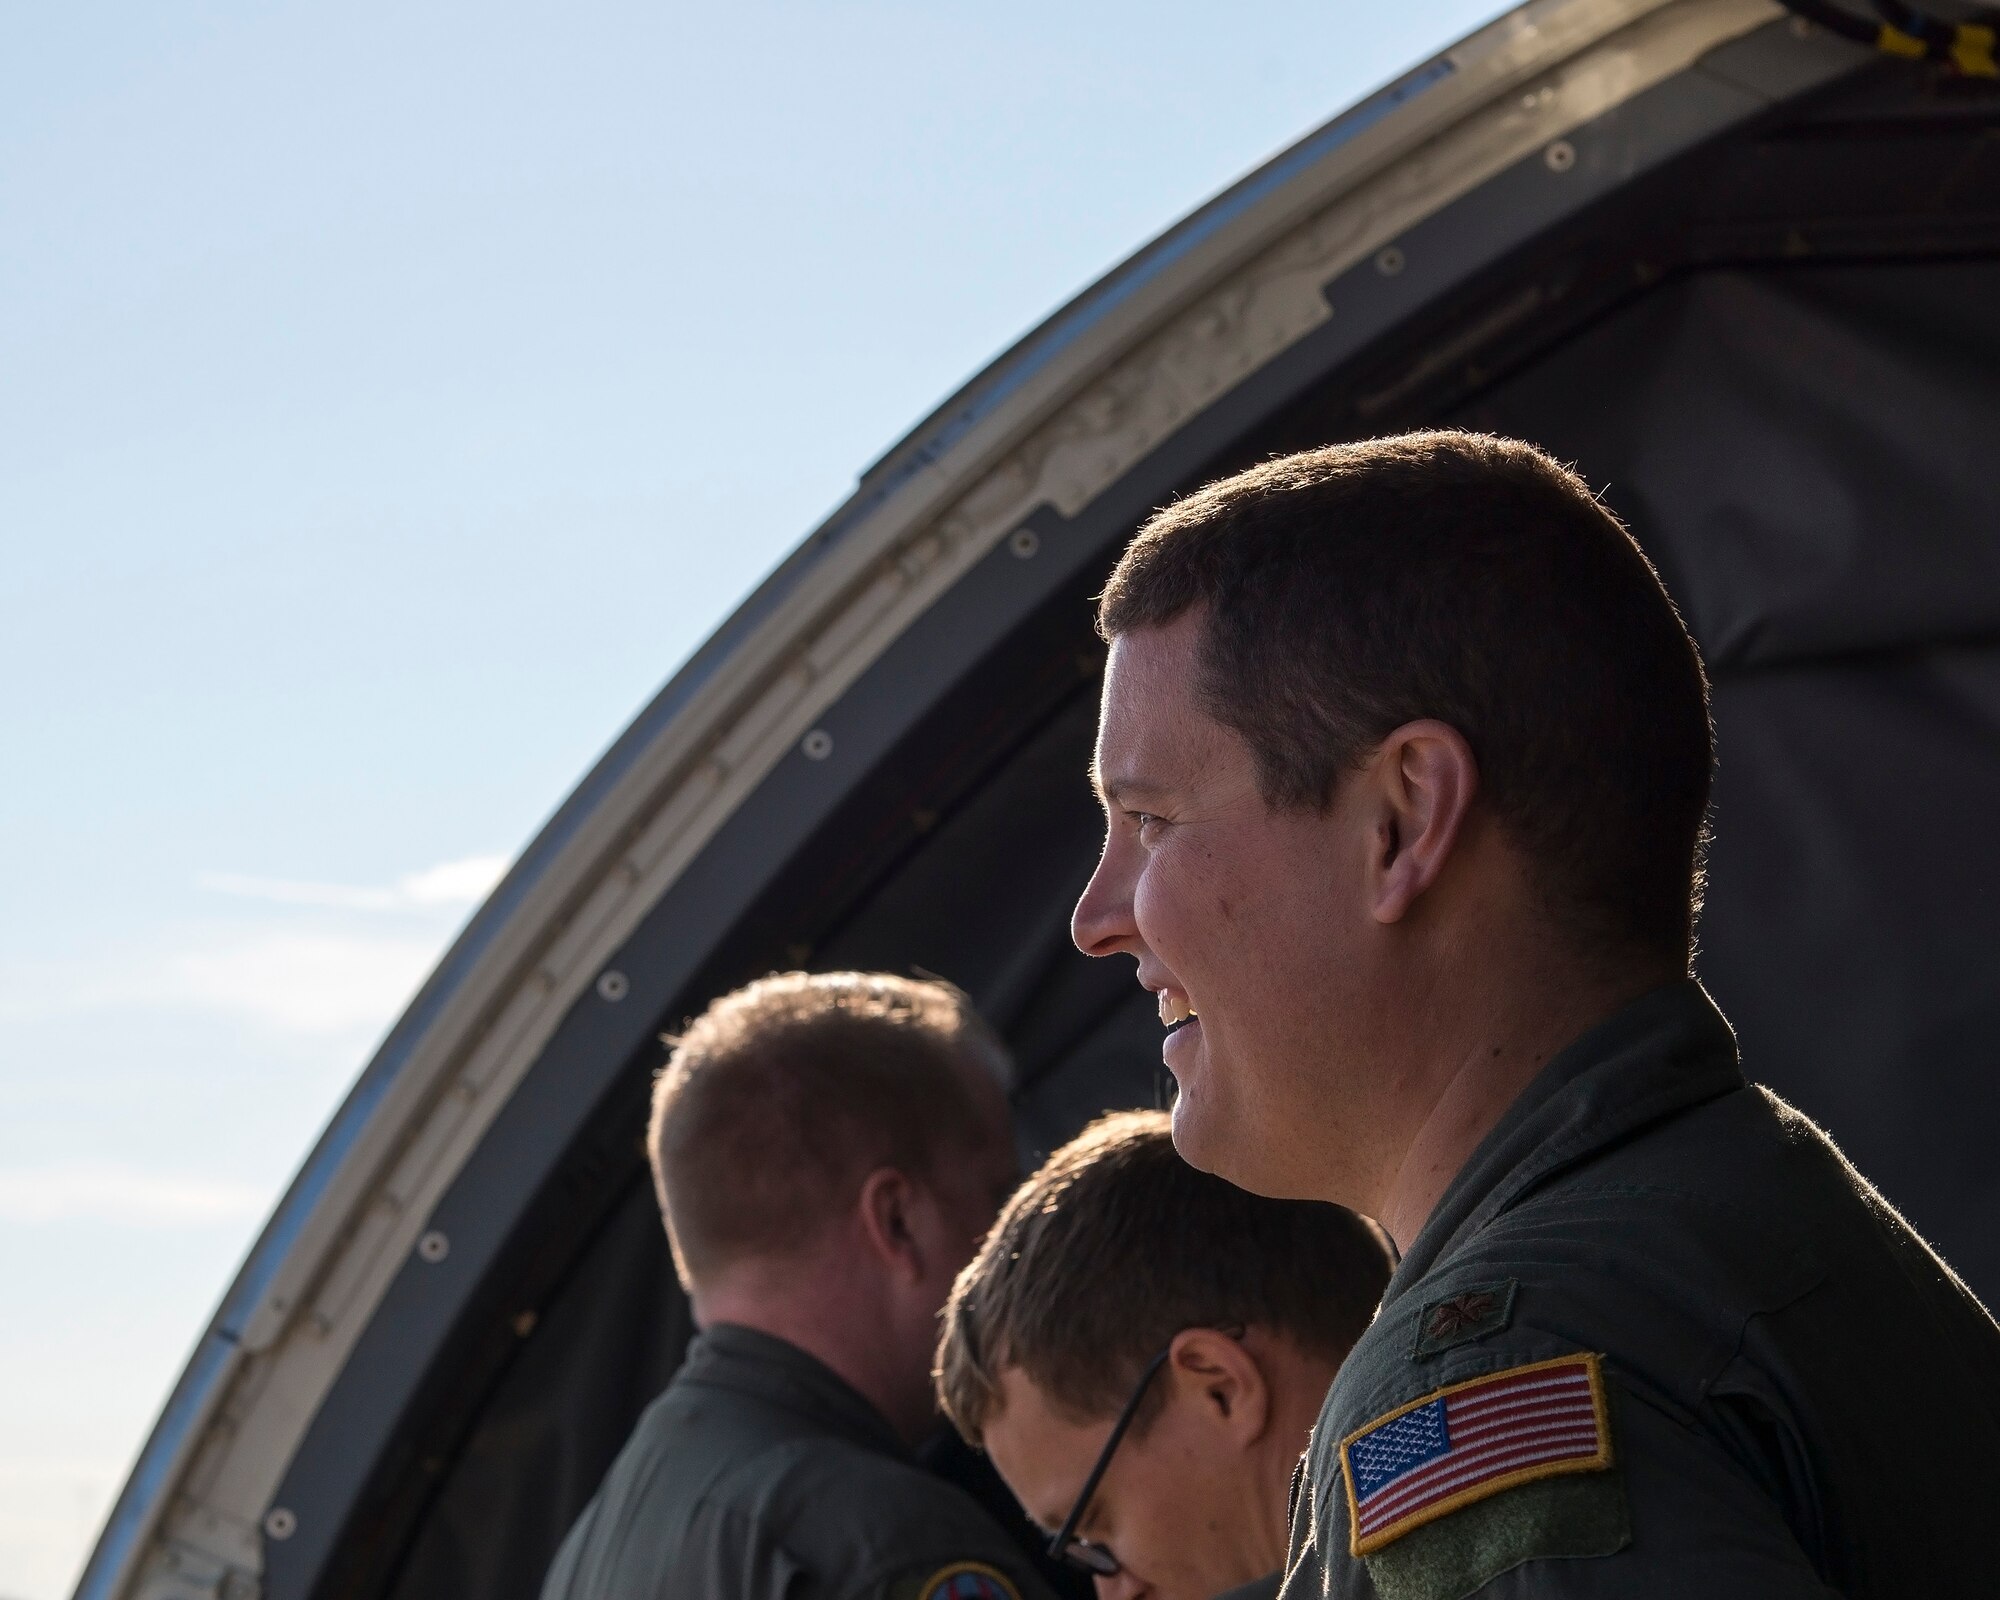 U.S. Air Force Maj. Benjamin Oatley, a 50th Air Refueling Squadron pilot, attends a tour of a KC-46 Pegasus aircraft assigned to McConnell Air Force Base, Kan., at MacDill Air Force Base, Fla., Jan. 29, 2020.